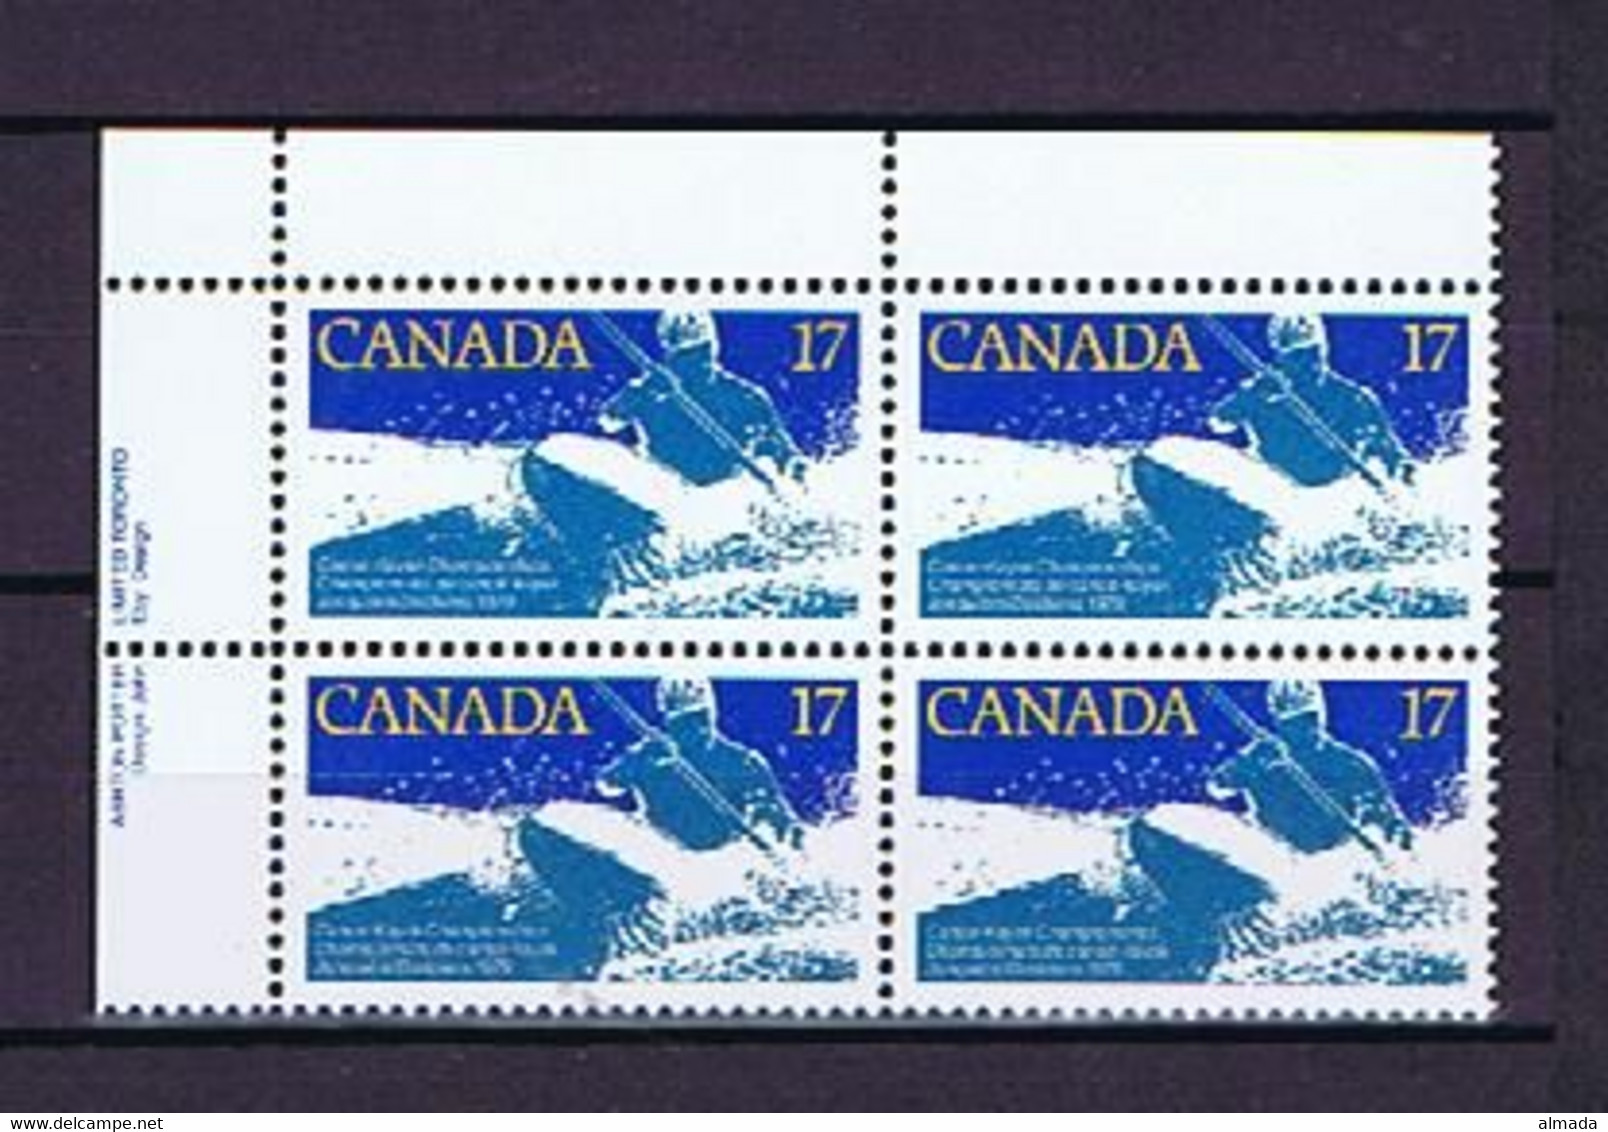 Canada 1979: Michel-Nr. 743**, Plate Block Mnh, Postfrisch, Neuf - Num. Planches & Inscriptions Marge